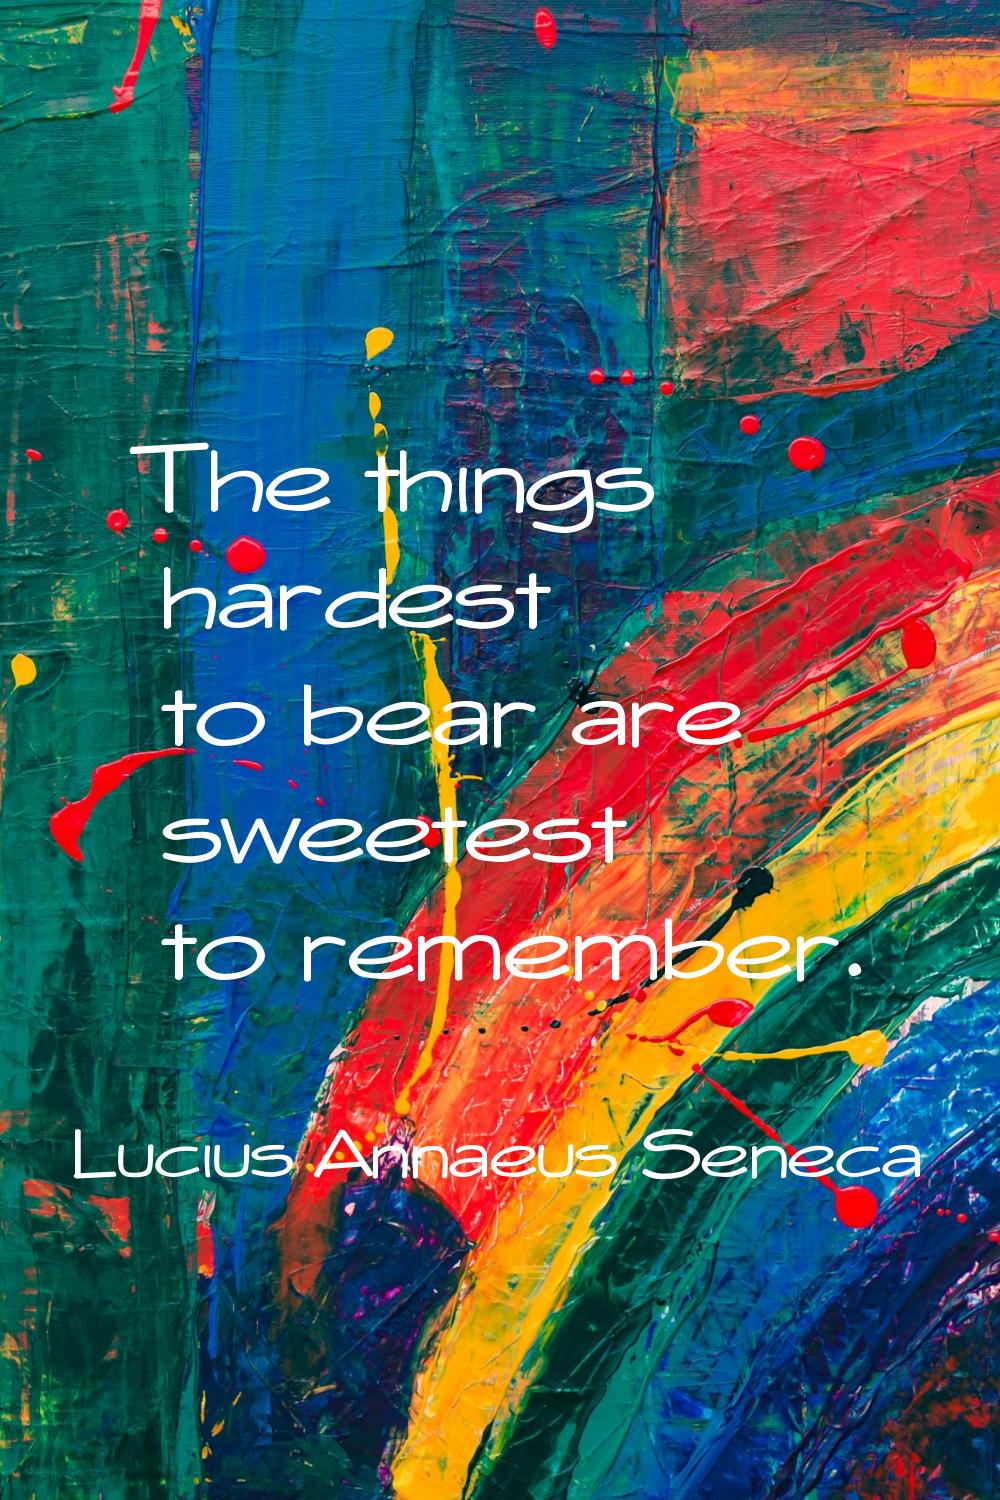 The things hardest to bear are sweetest to remember.